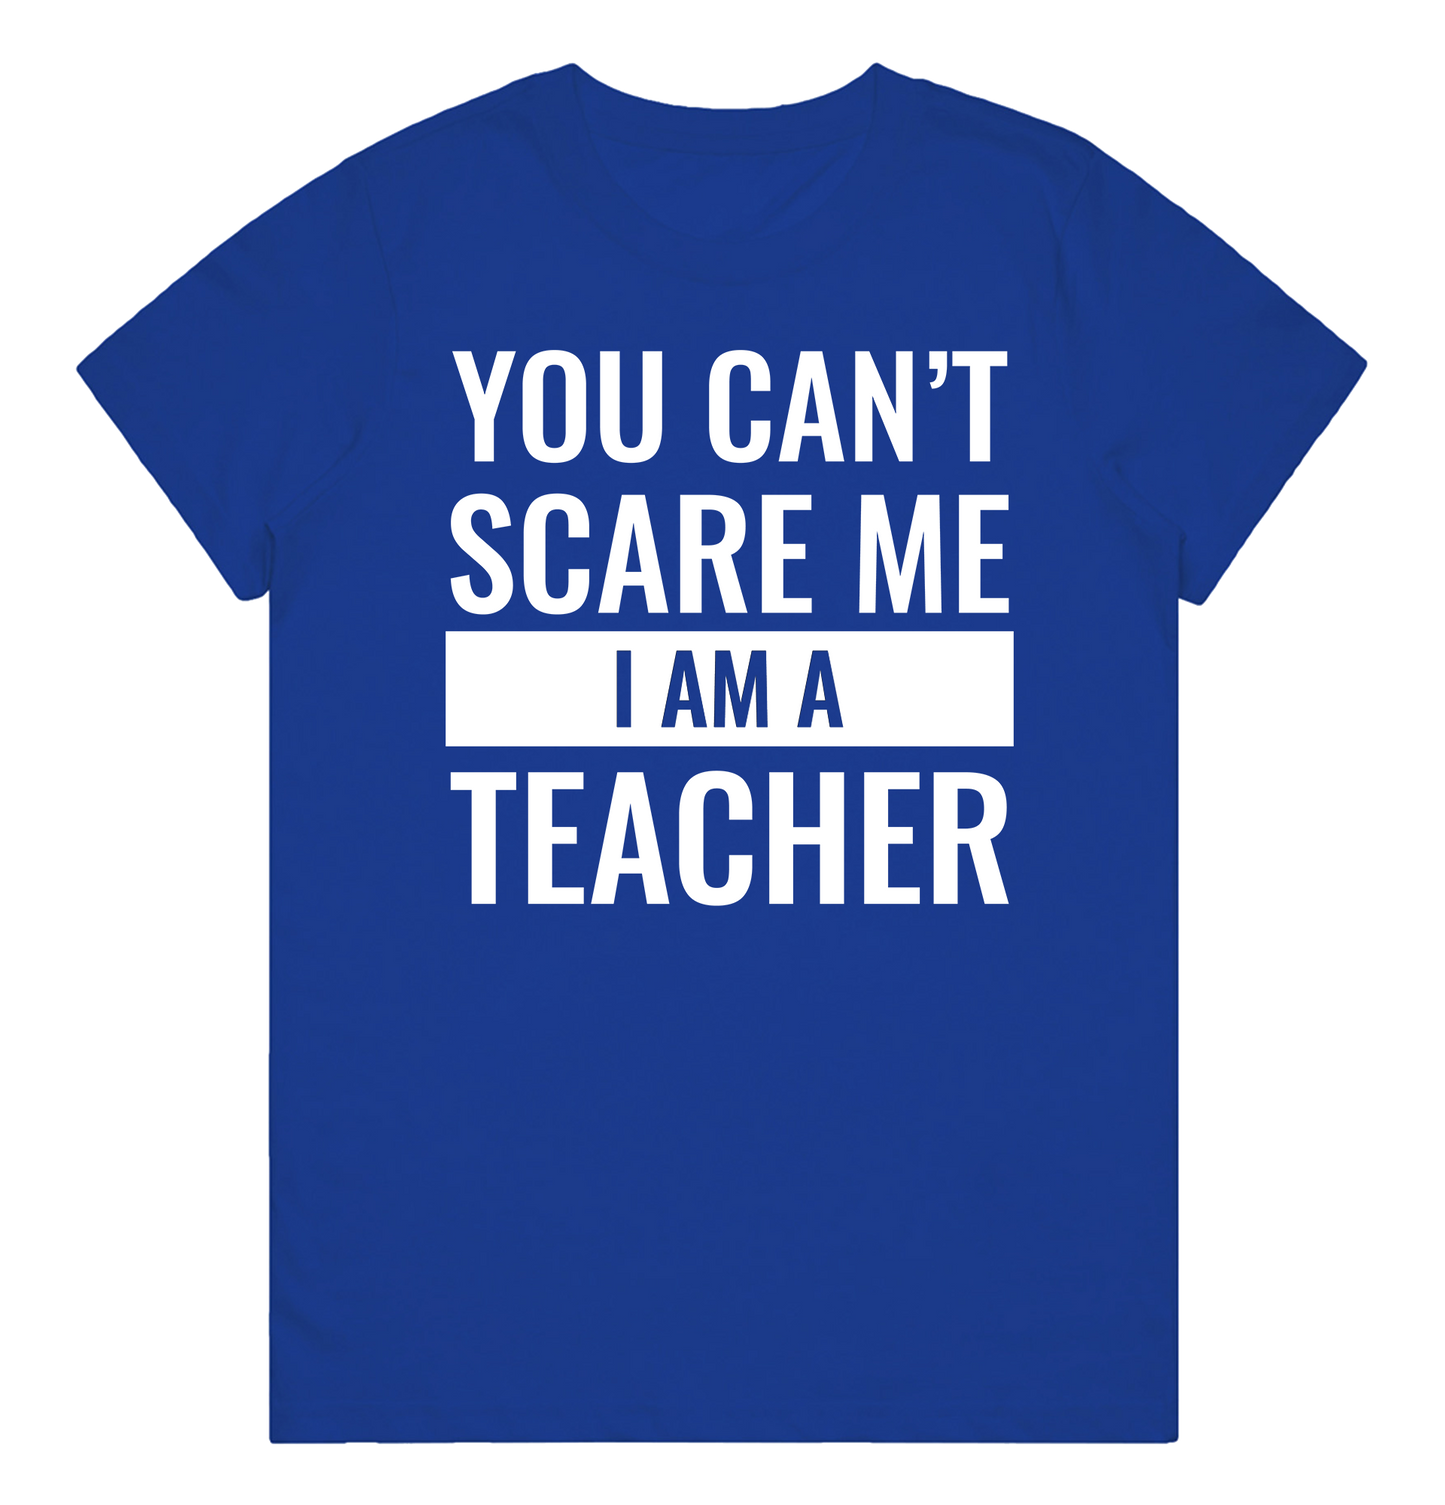 Women's T-Shirt - Can't Scare Me - Profession